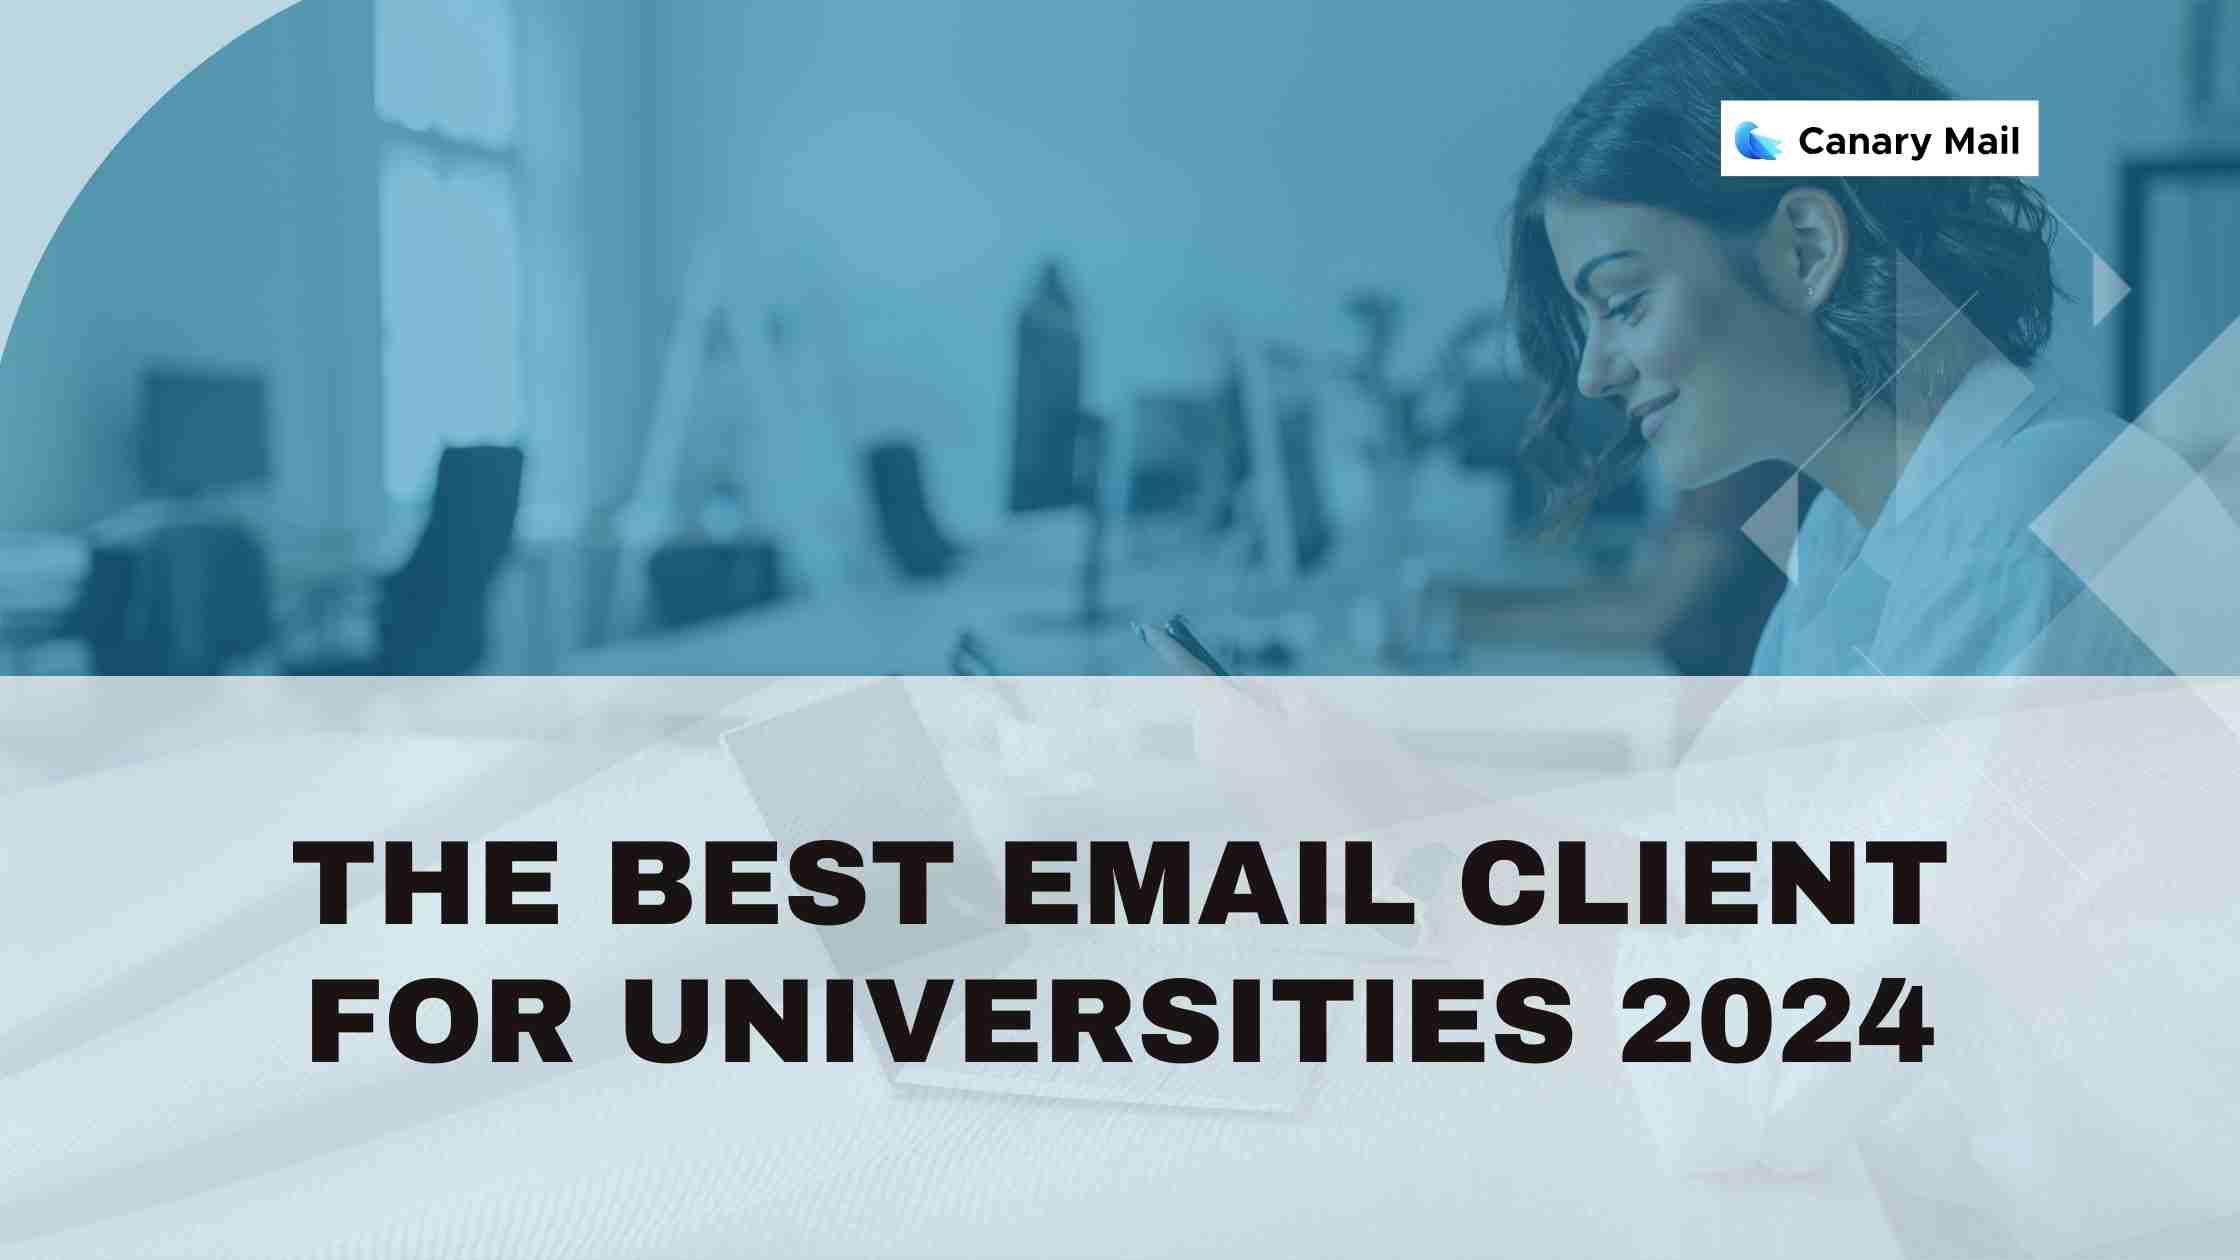 The Best Email Client for Universities 2024